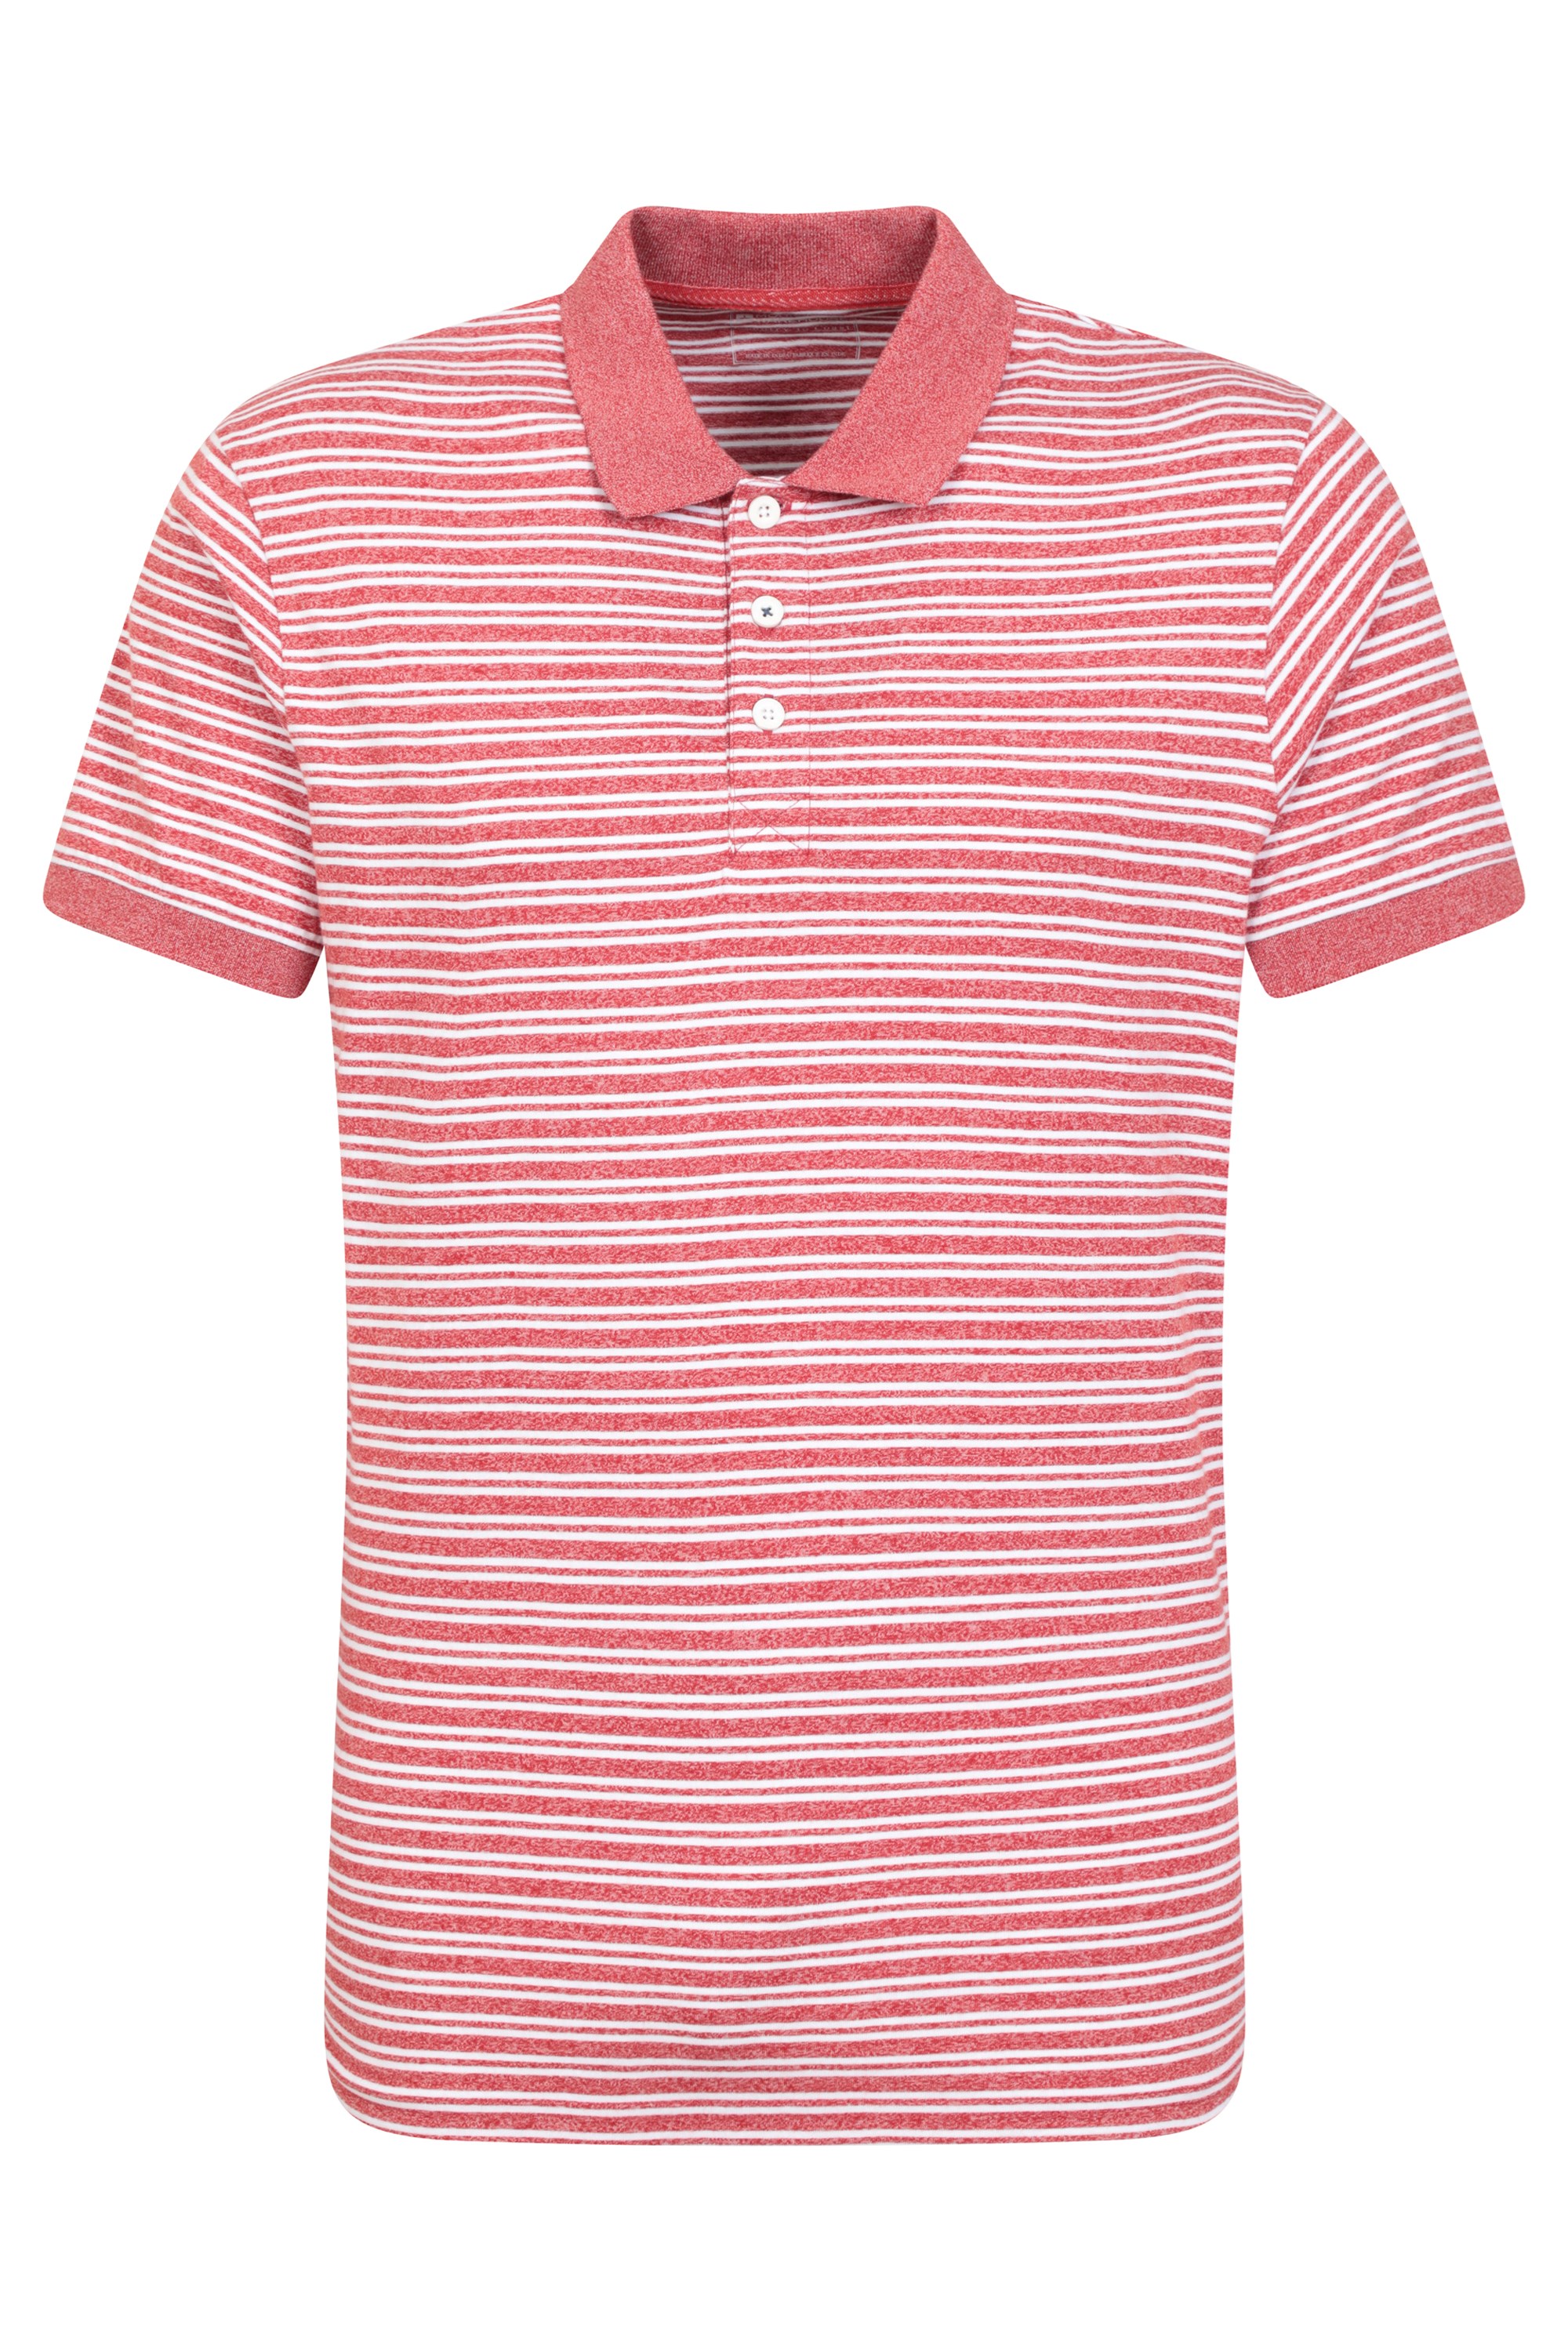 Scouller Mens Striped Polo Shirt - Red